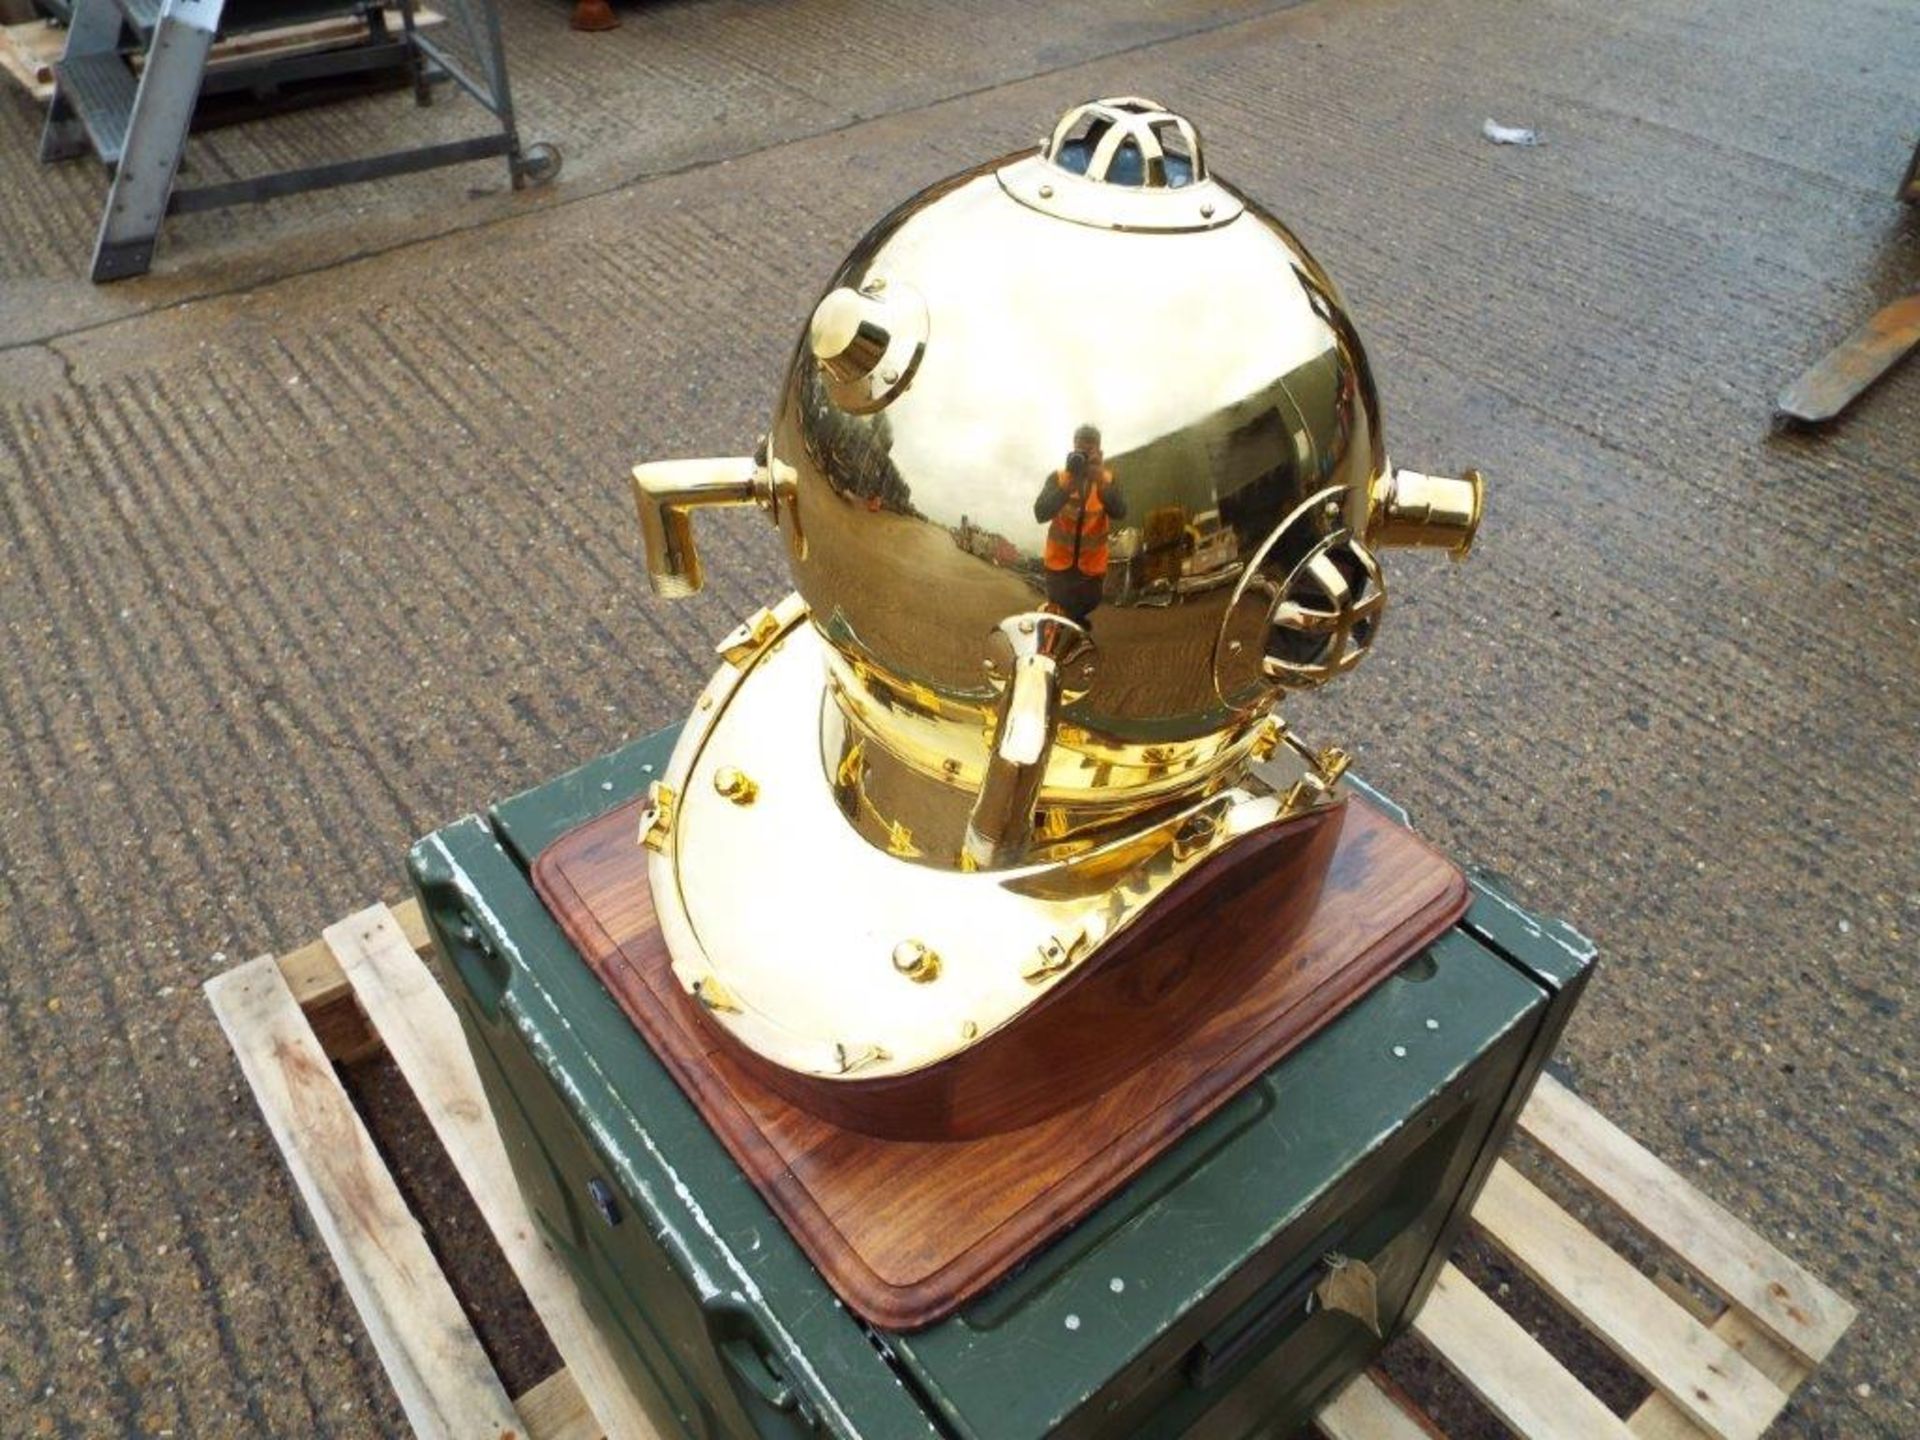 Replica Full Size U.S. Navy Mark V Brass Diving Helmet on Wooden Display Stand - Image 3 of 6